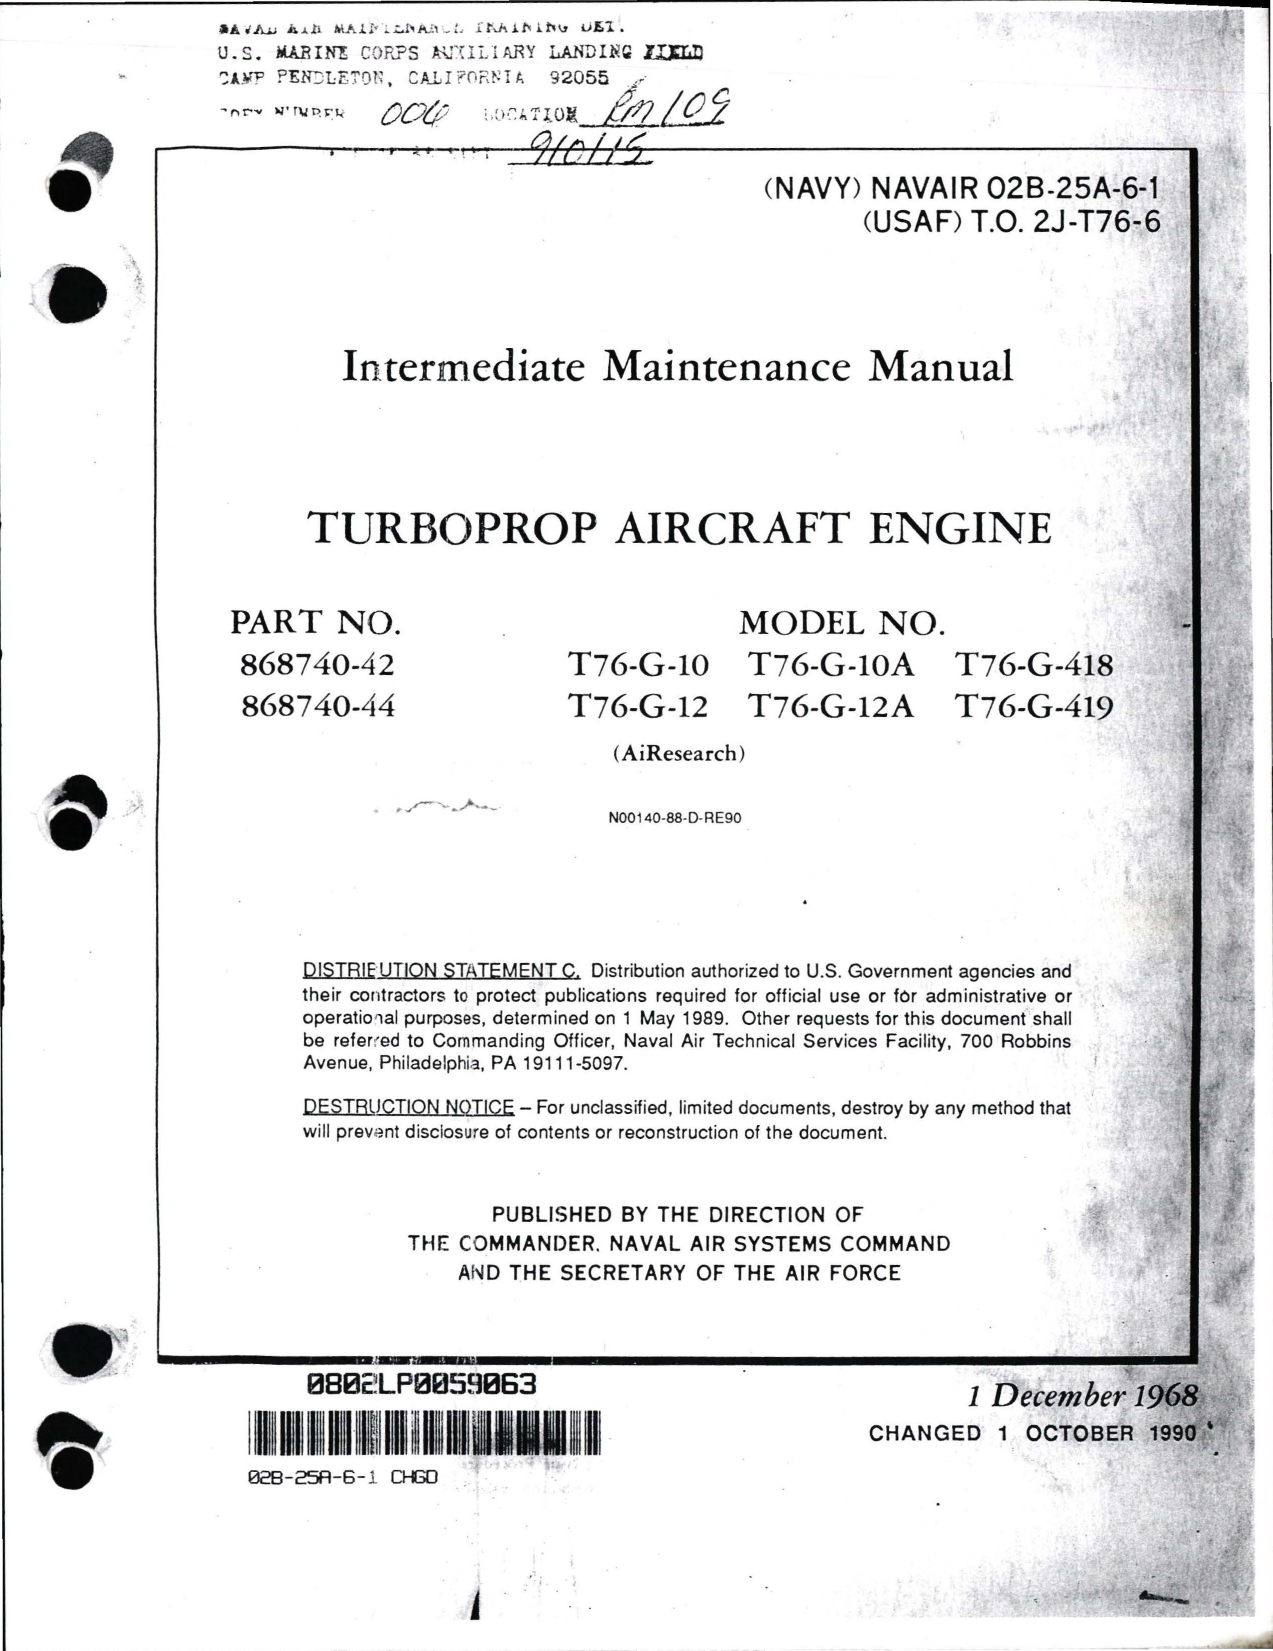 Sample page 1 from AirCorps Library document: Intermediate Maintenance for Turboprop Engine - Parts 868740-42 and 868740-44 